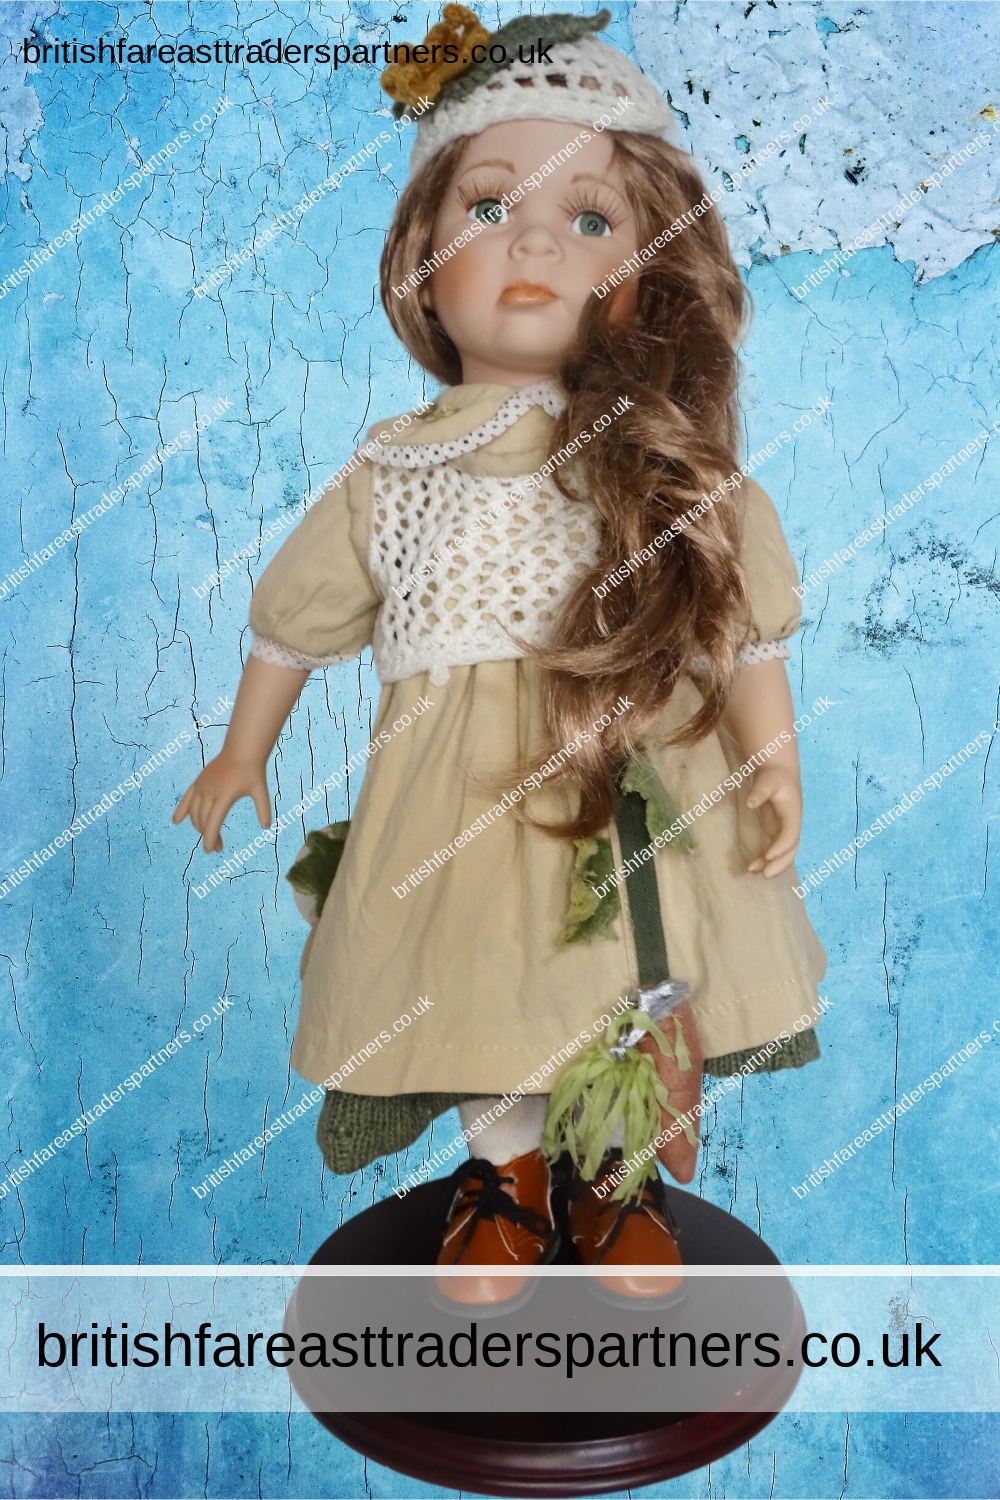 VINTAGE 19 INCHES PORCELAIN DOLL STRAWBERRY BLONDE DOLL IN BROWN DRESS VINTAGE | CERAMICS | PORCELAIN |  COLLECTABLES | HOBBIES & PASTIMES | DECORATIVE COLLECTABLES | DOLLS | FASHION | BEAUTY |  CULTURE | HERITAGE | LIFESTYLE